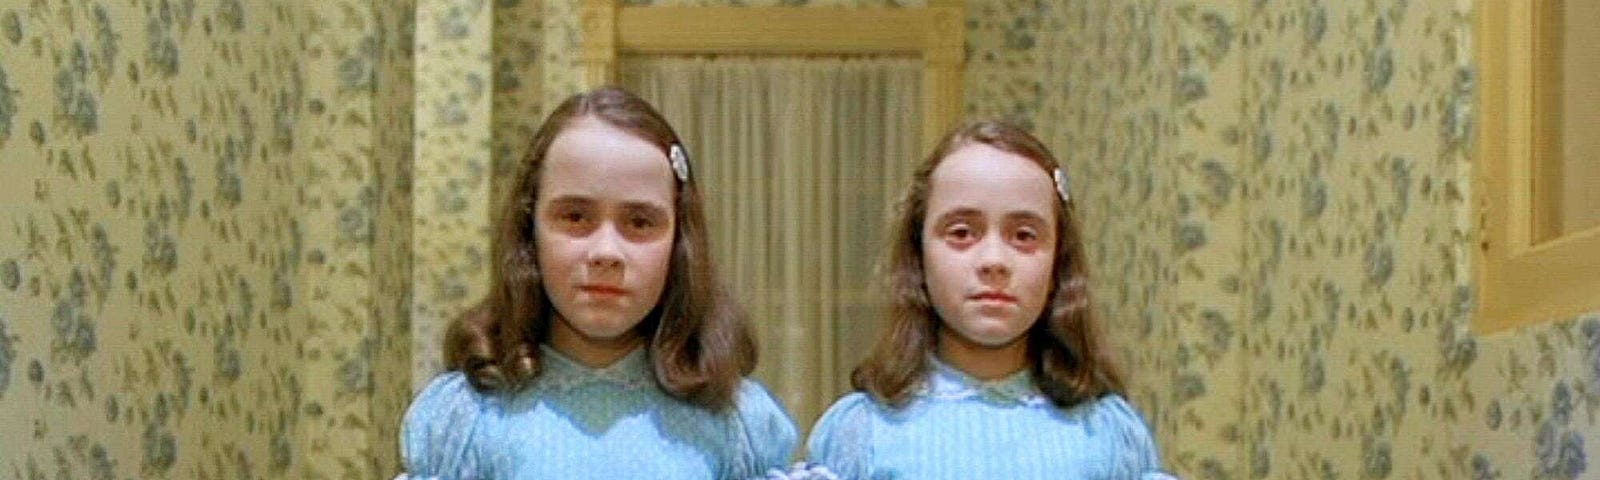 Twins from “The Shining.”